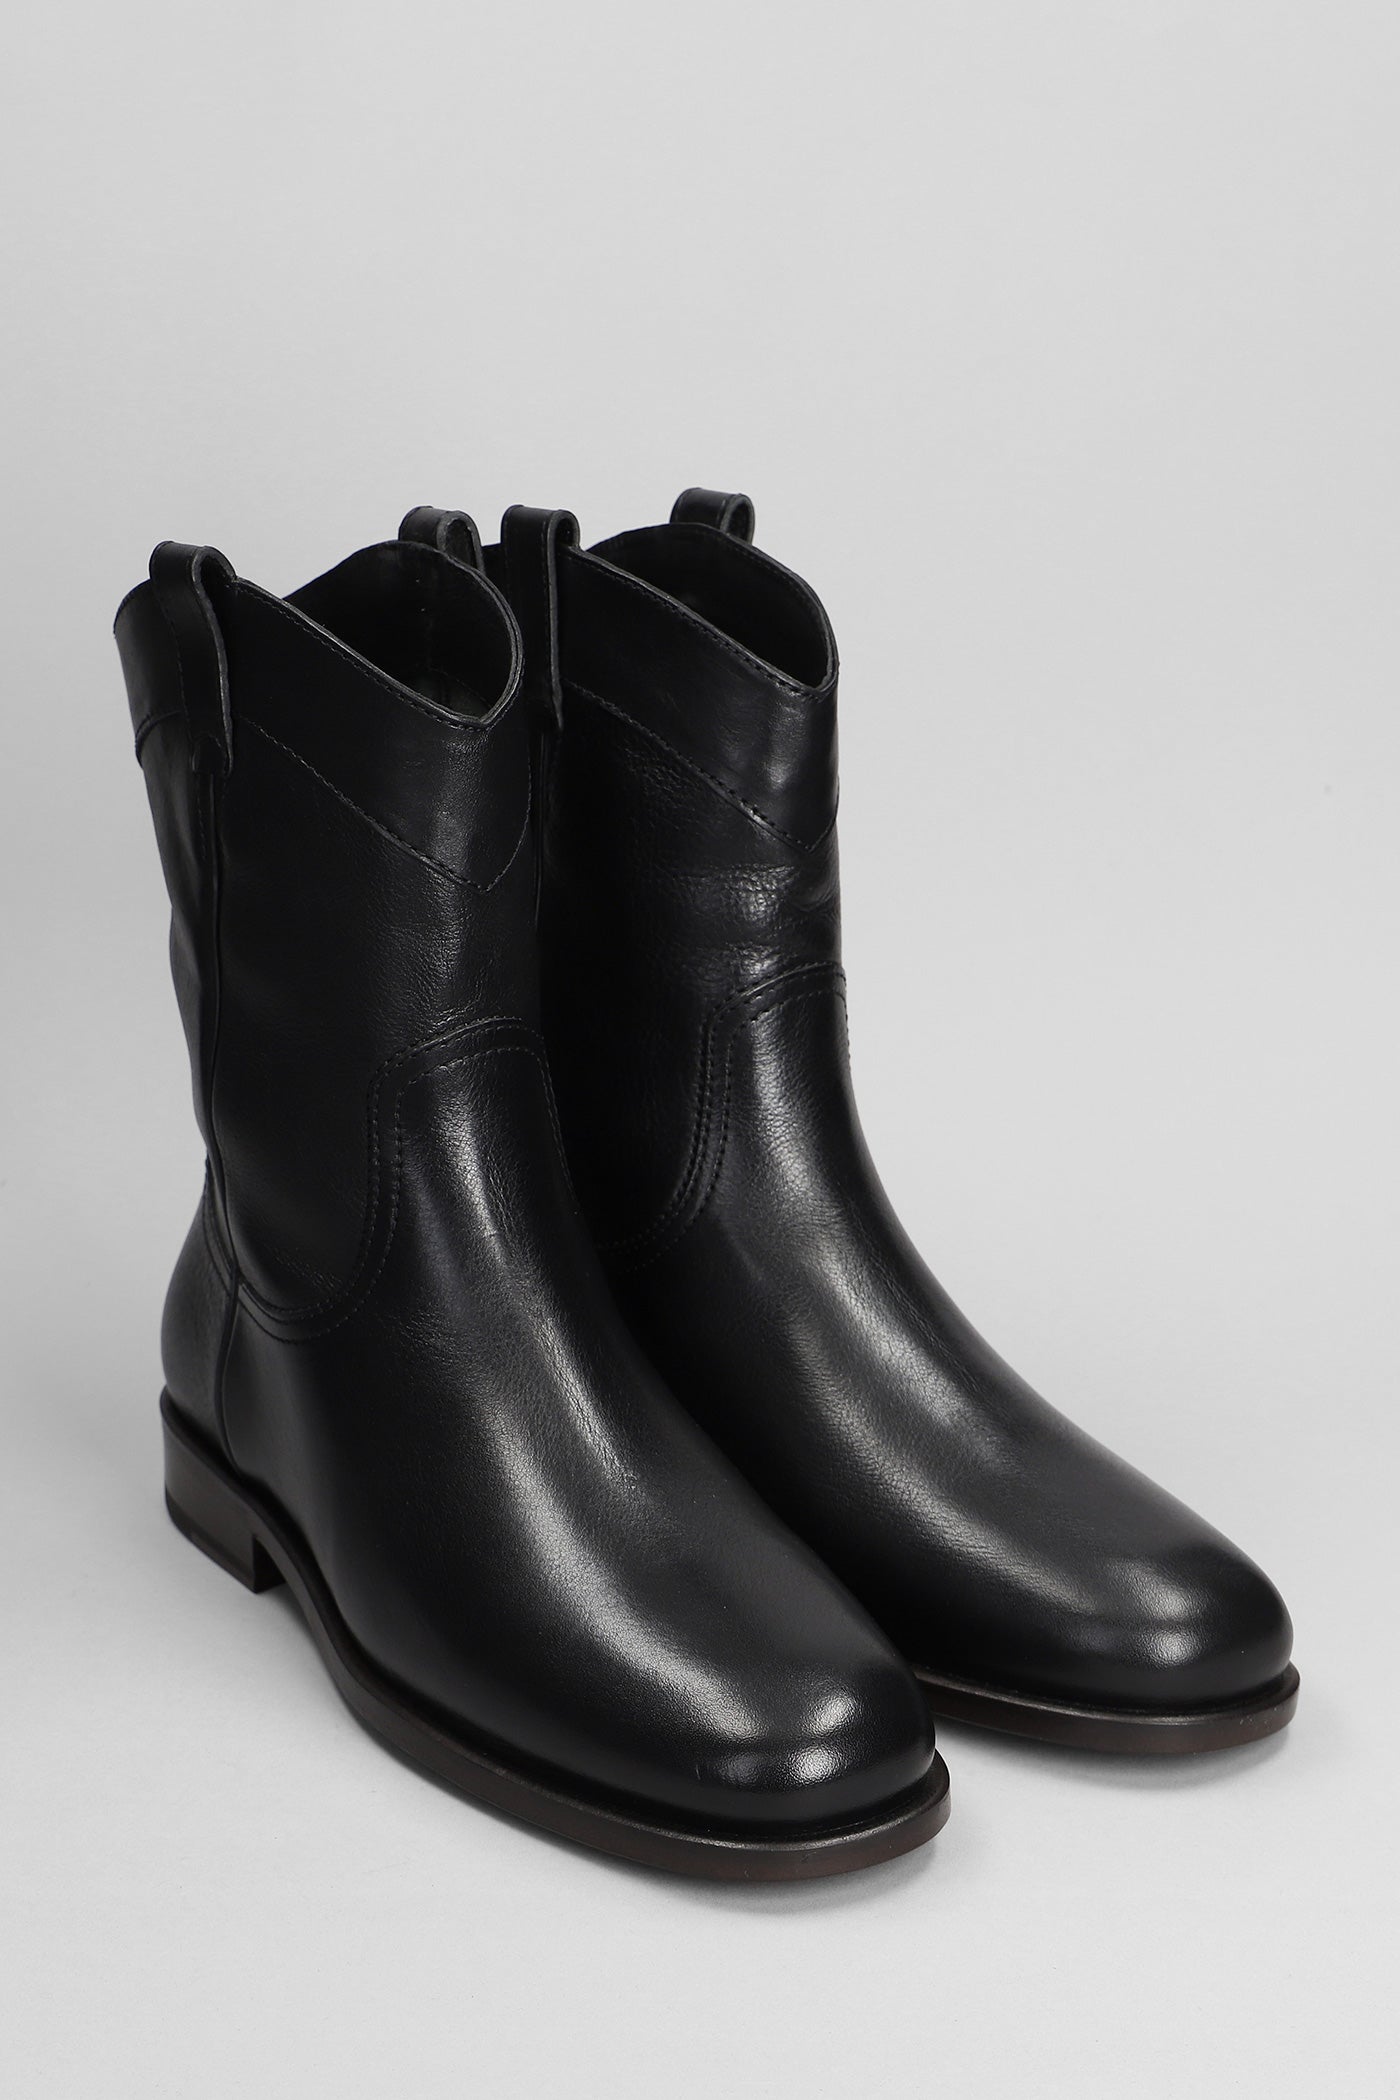 Ankle boots in black leather